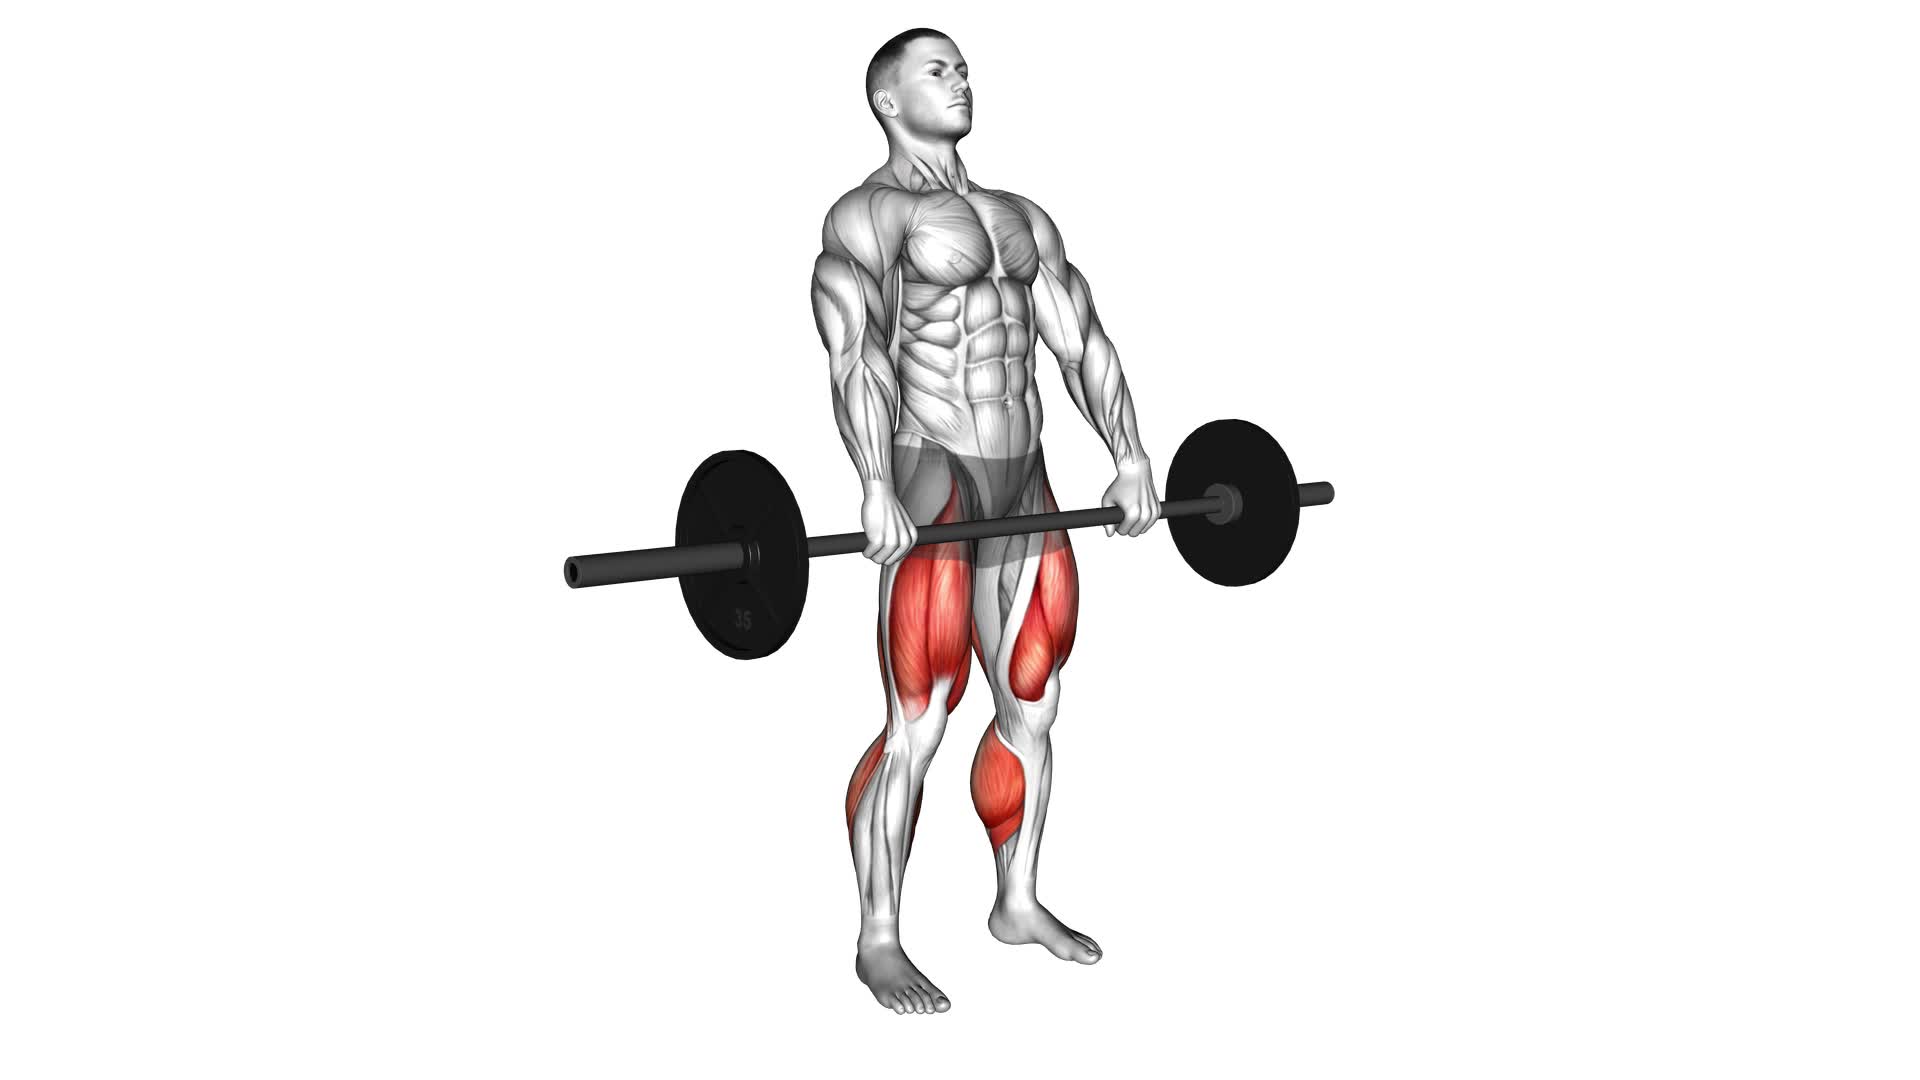 Barbell Clean Deadlift - Video Exercise Guide & Tips